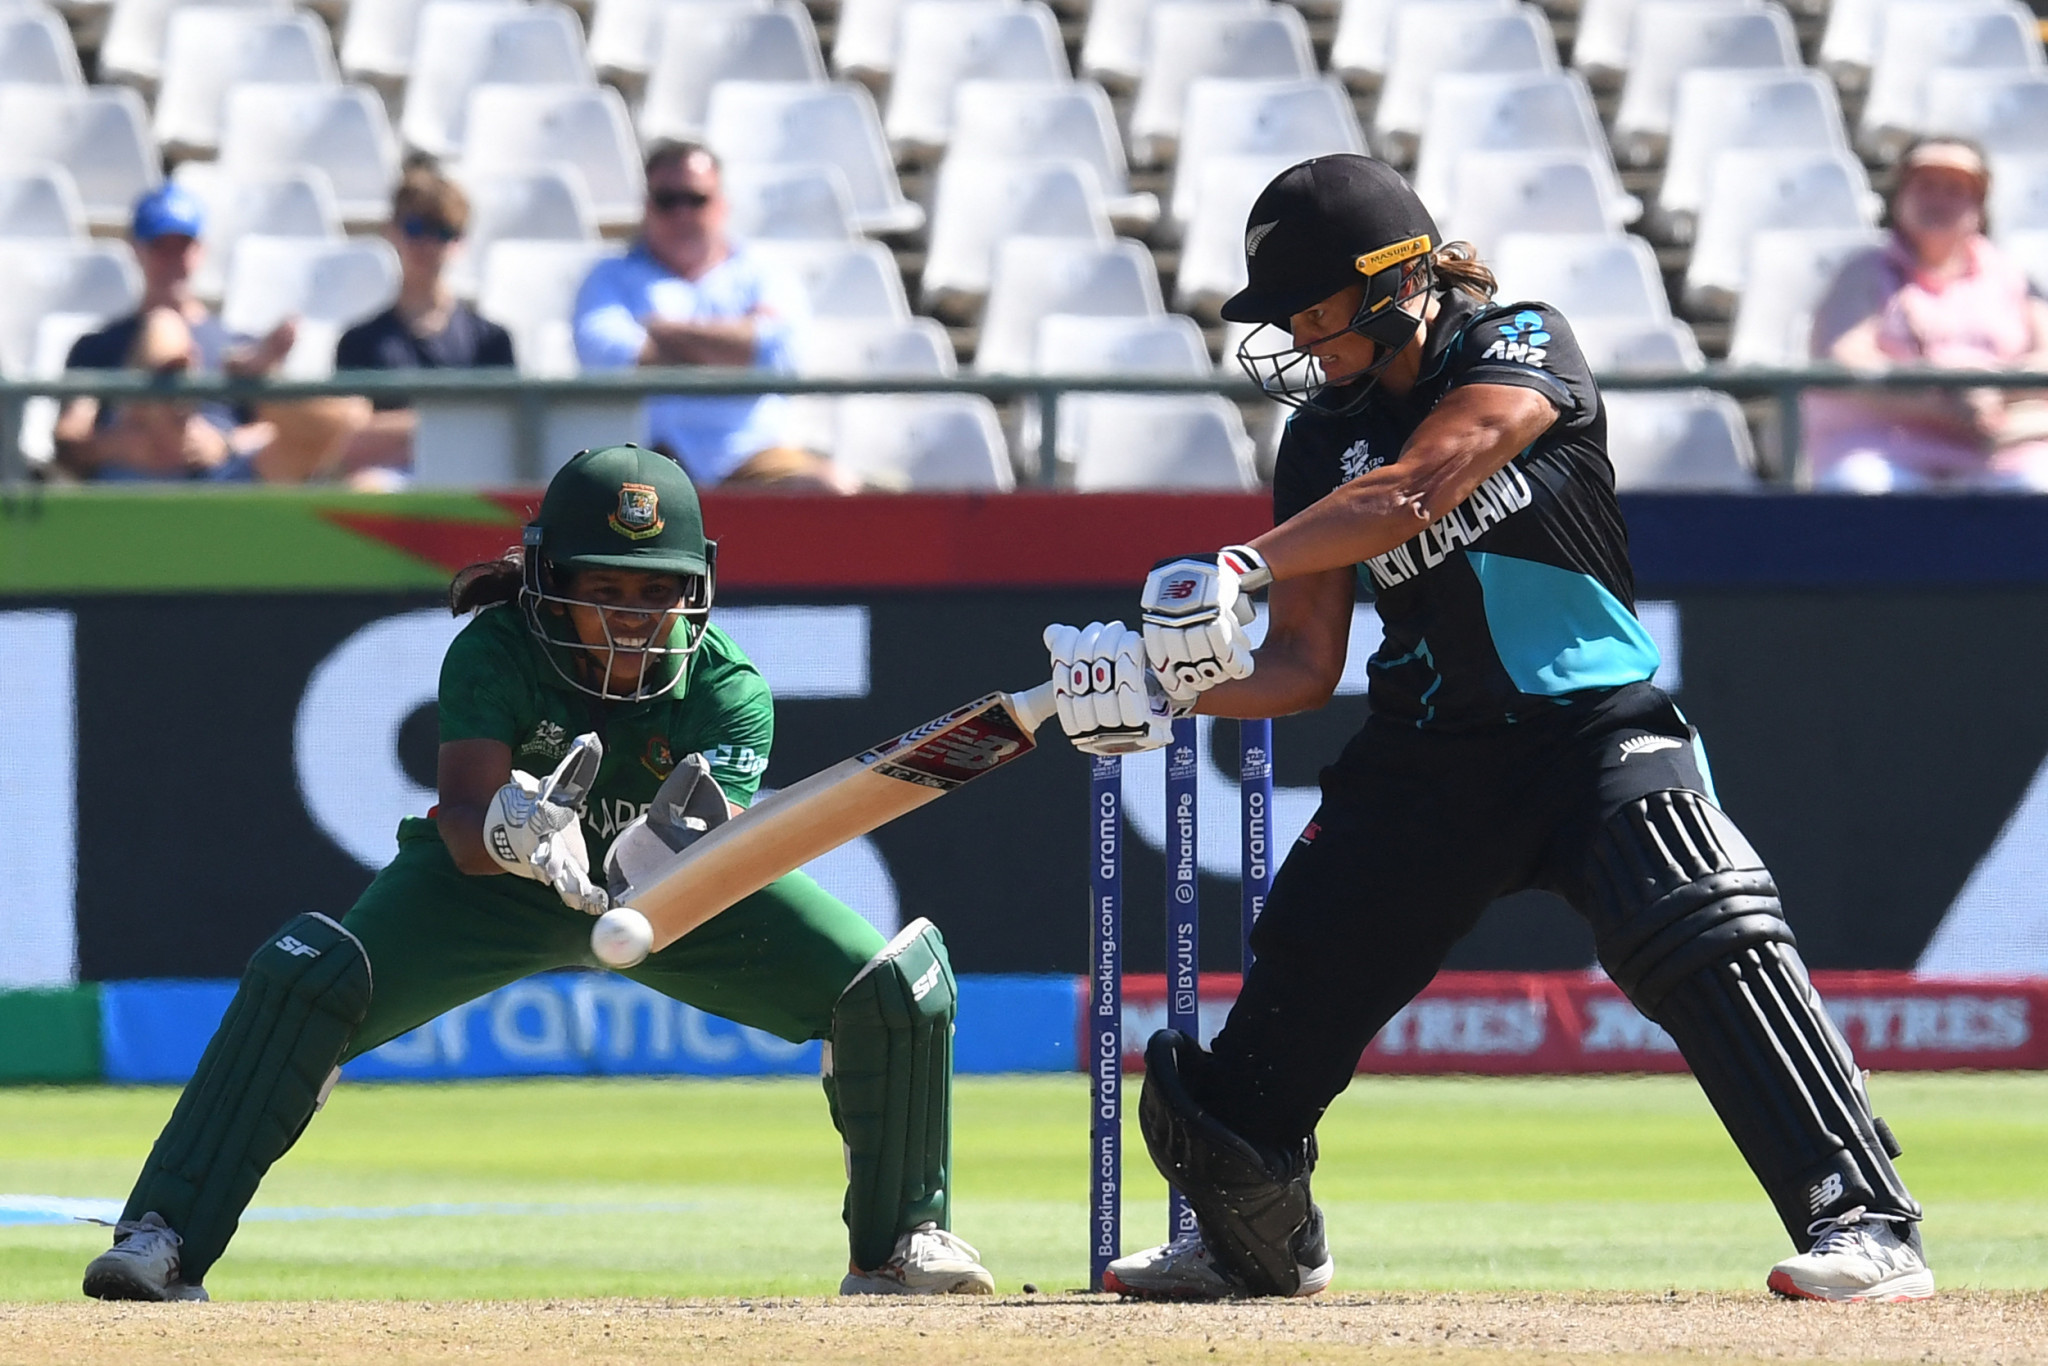 Bates and Mathews shine with the bat as New Zealand and West Indies win